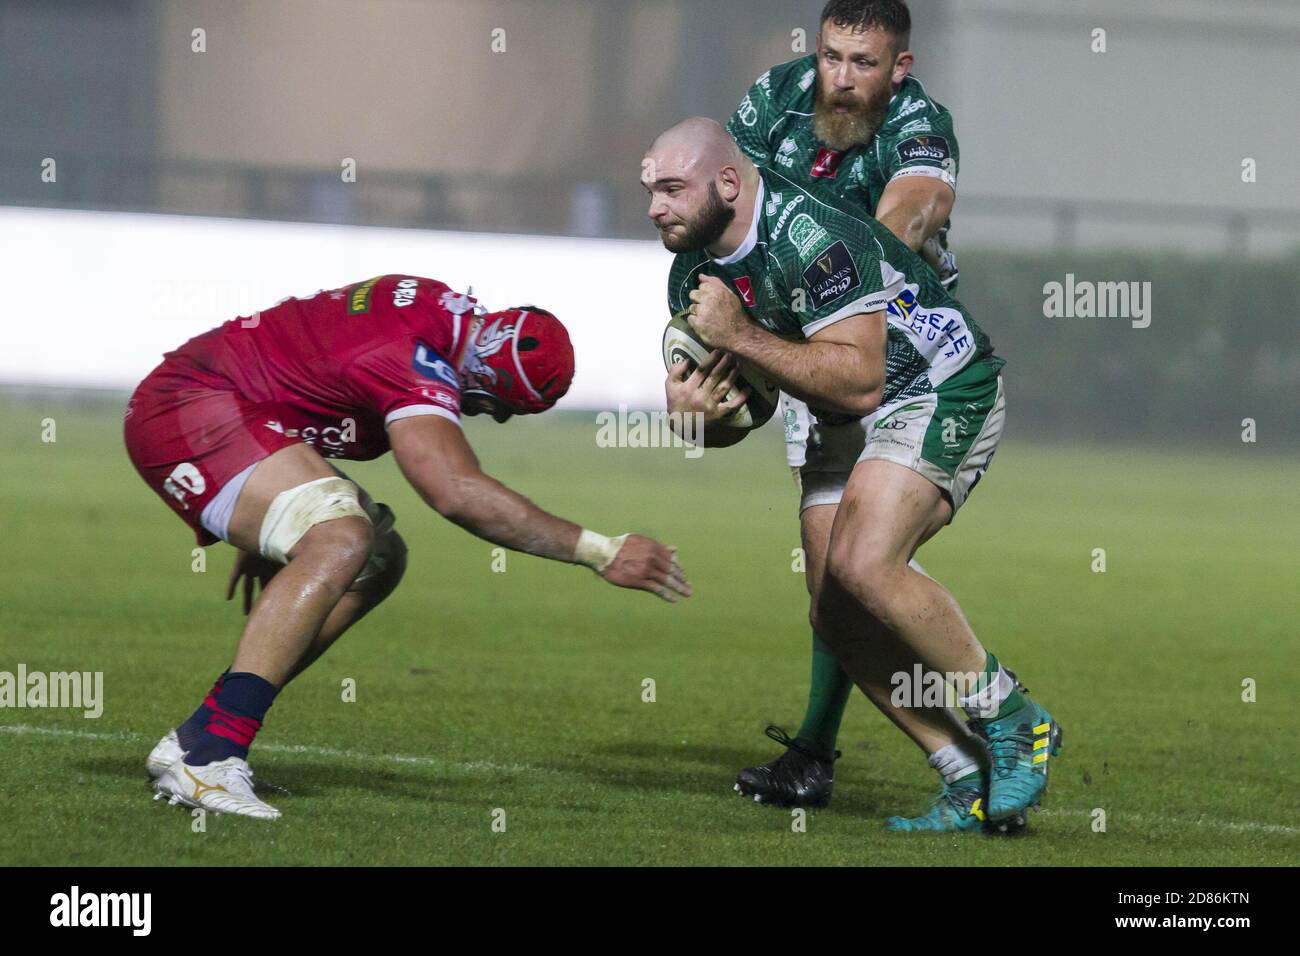 Filippo Alongi (Treviso) during Benetton Treviso vs Scarlets Rugby, Rugby  Guinness Pro 14 match, Treviso, Italy, 23 Oct 2020 Credit: LM/Alfio Guarise  Stock Photo - Alamy